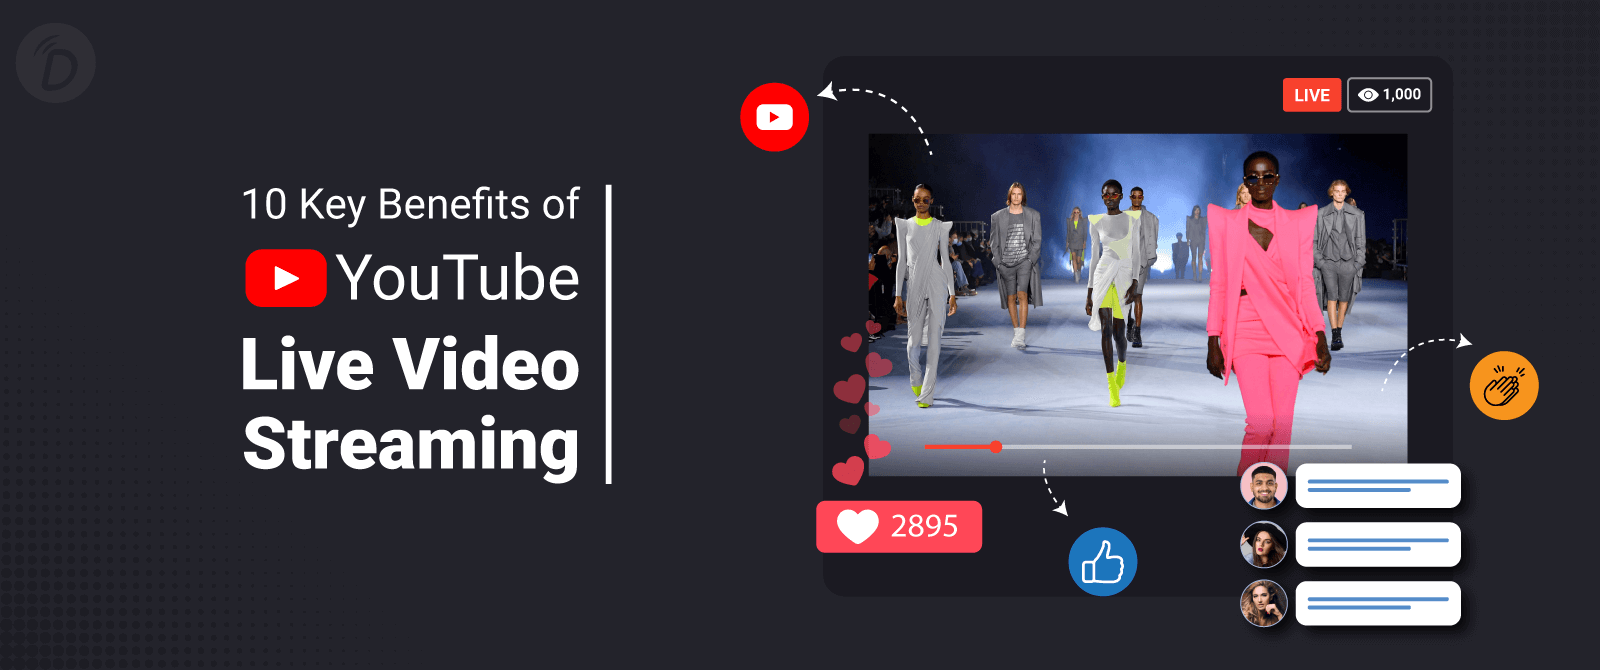 10 Key Benefits of Youtube Live Video Streaming